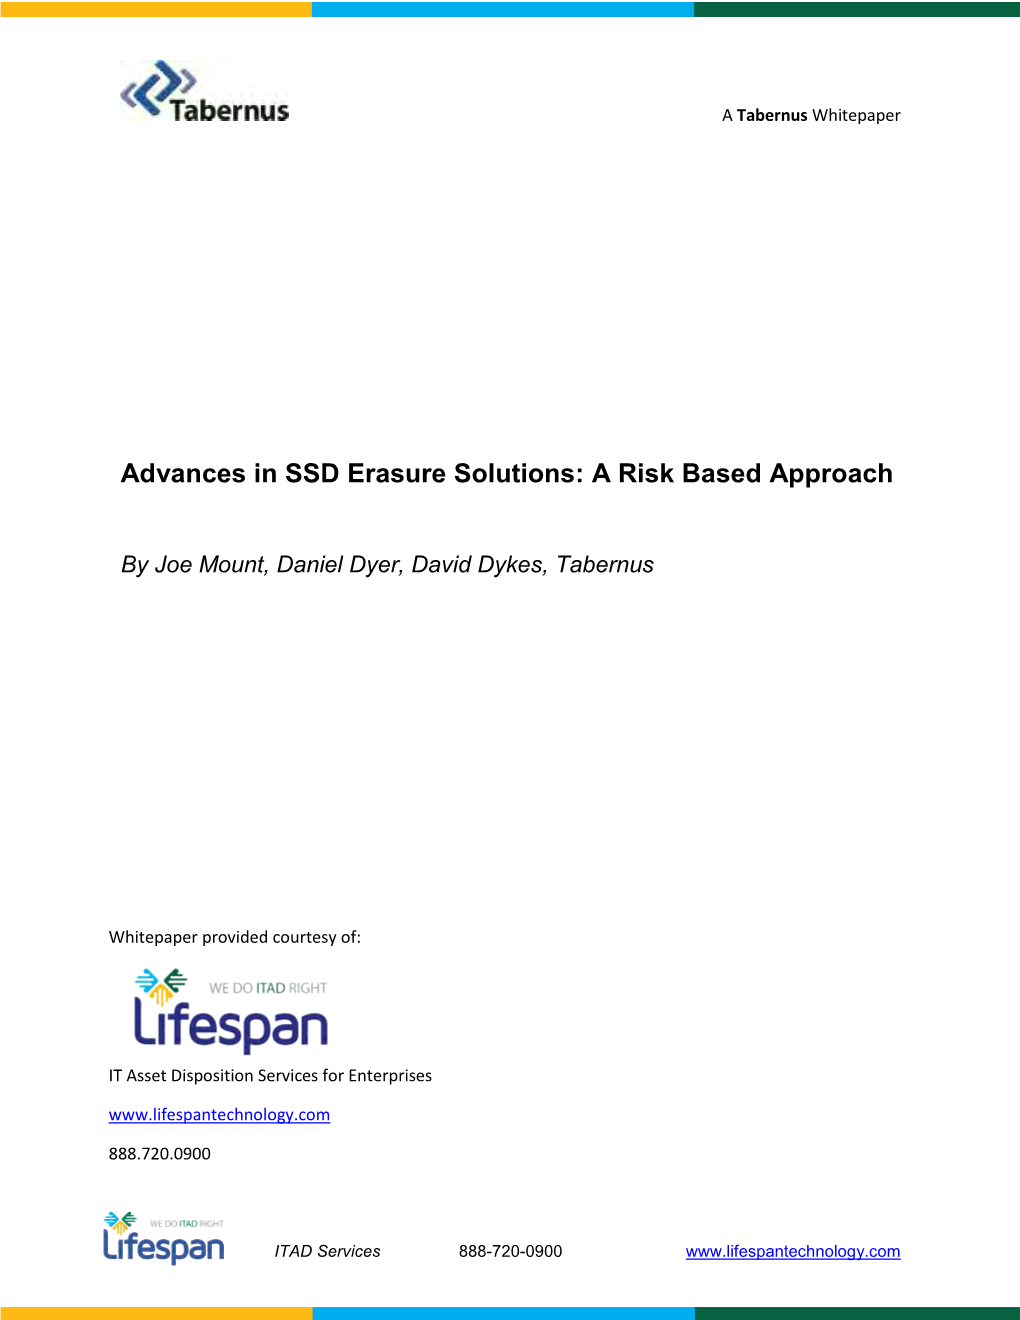 Advances in SSD Erasure Solutions: a Risk Based Approach